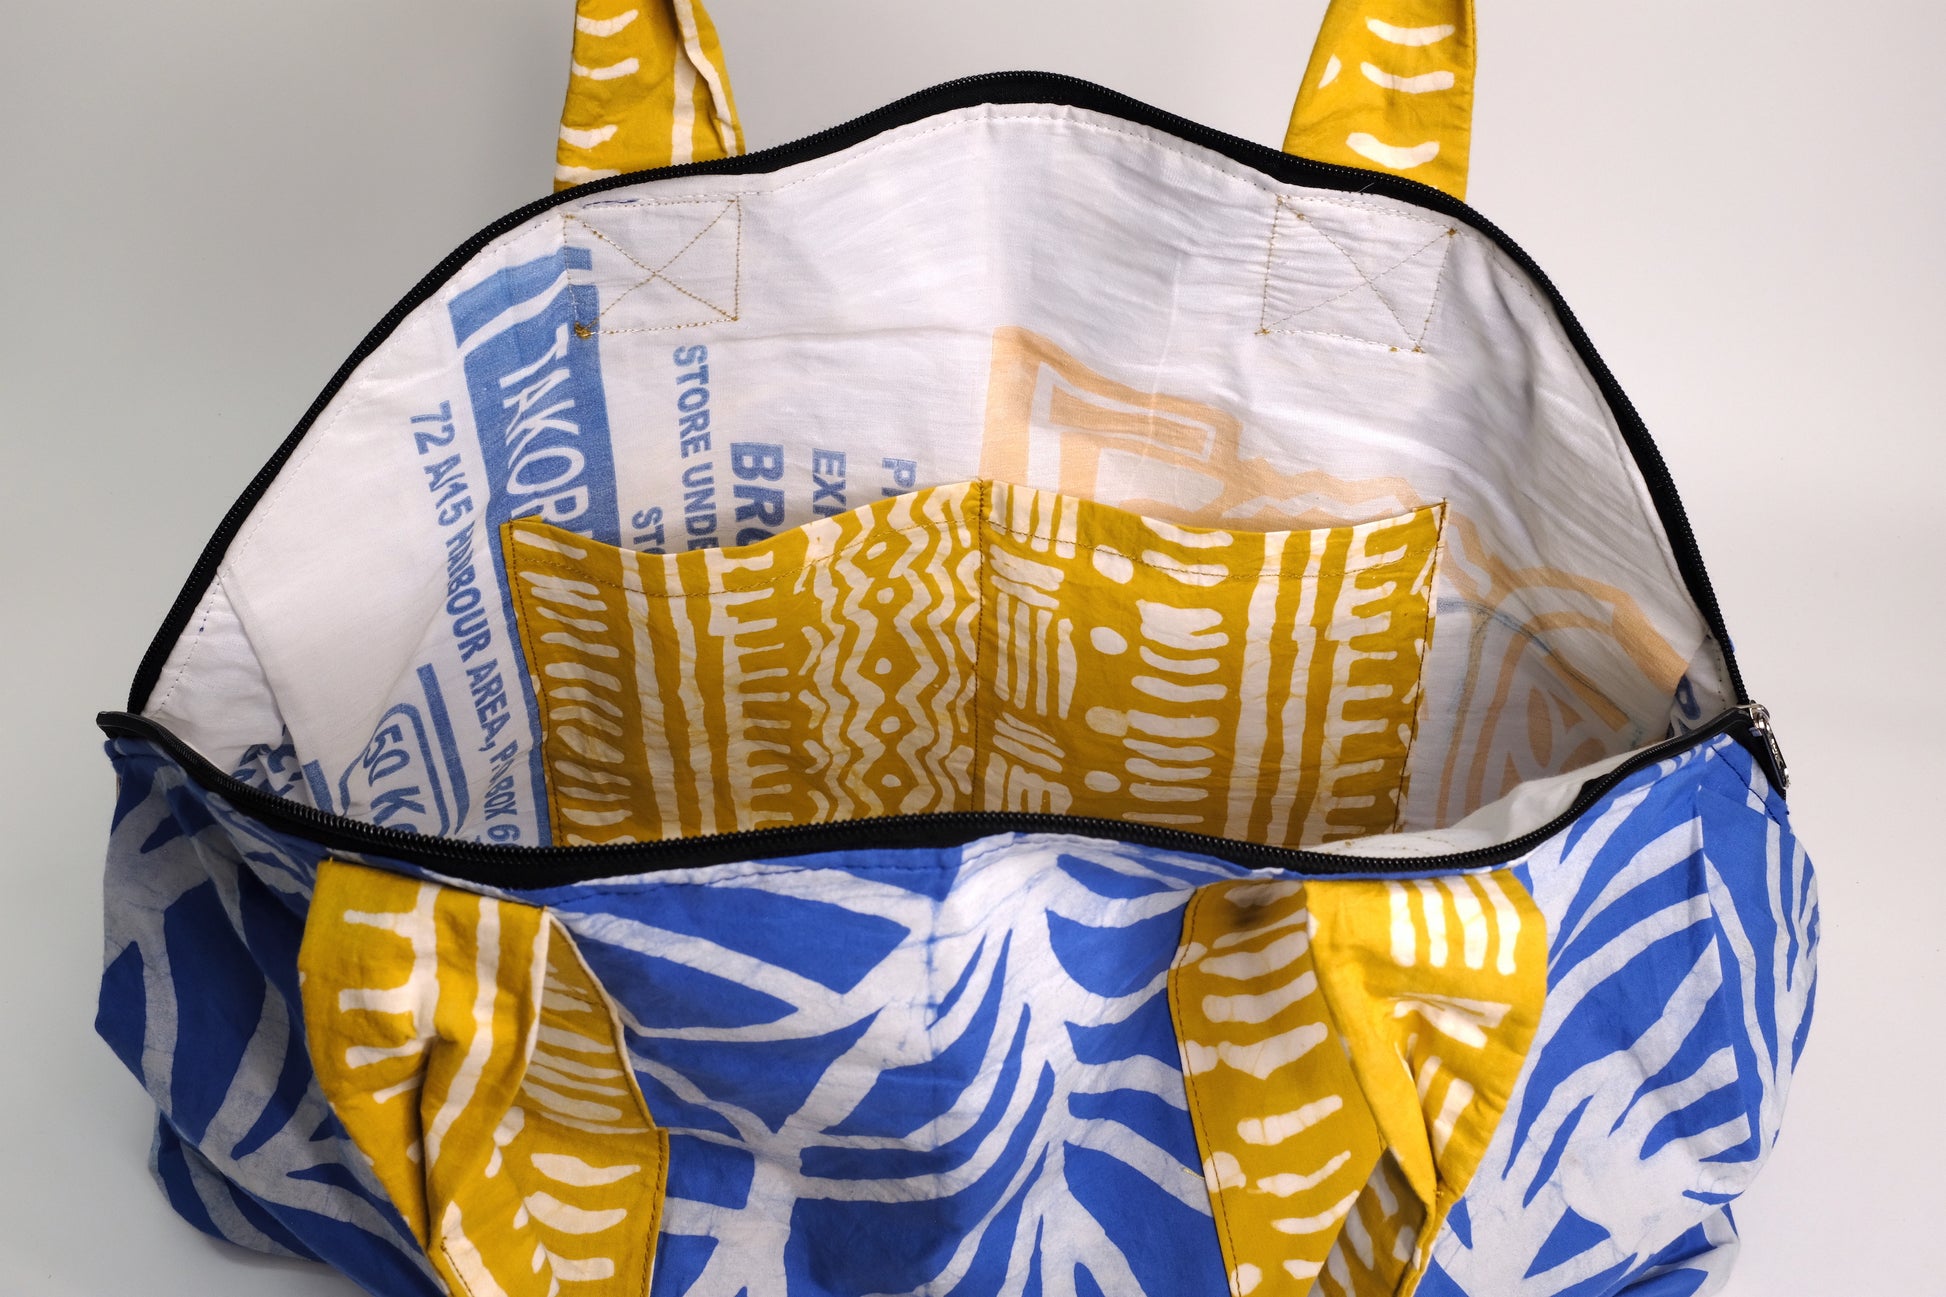 Large zippered weekend bag with a blue plant pattern and yellow straps.